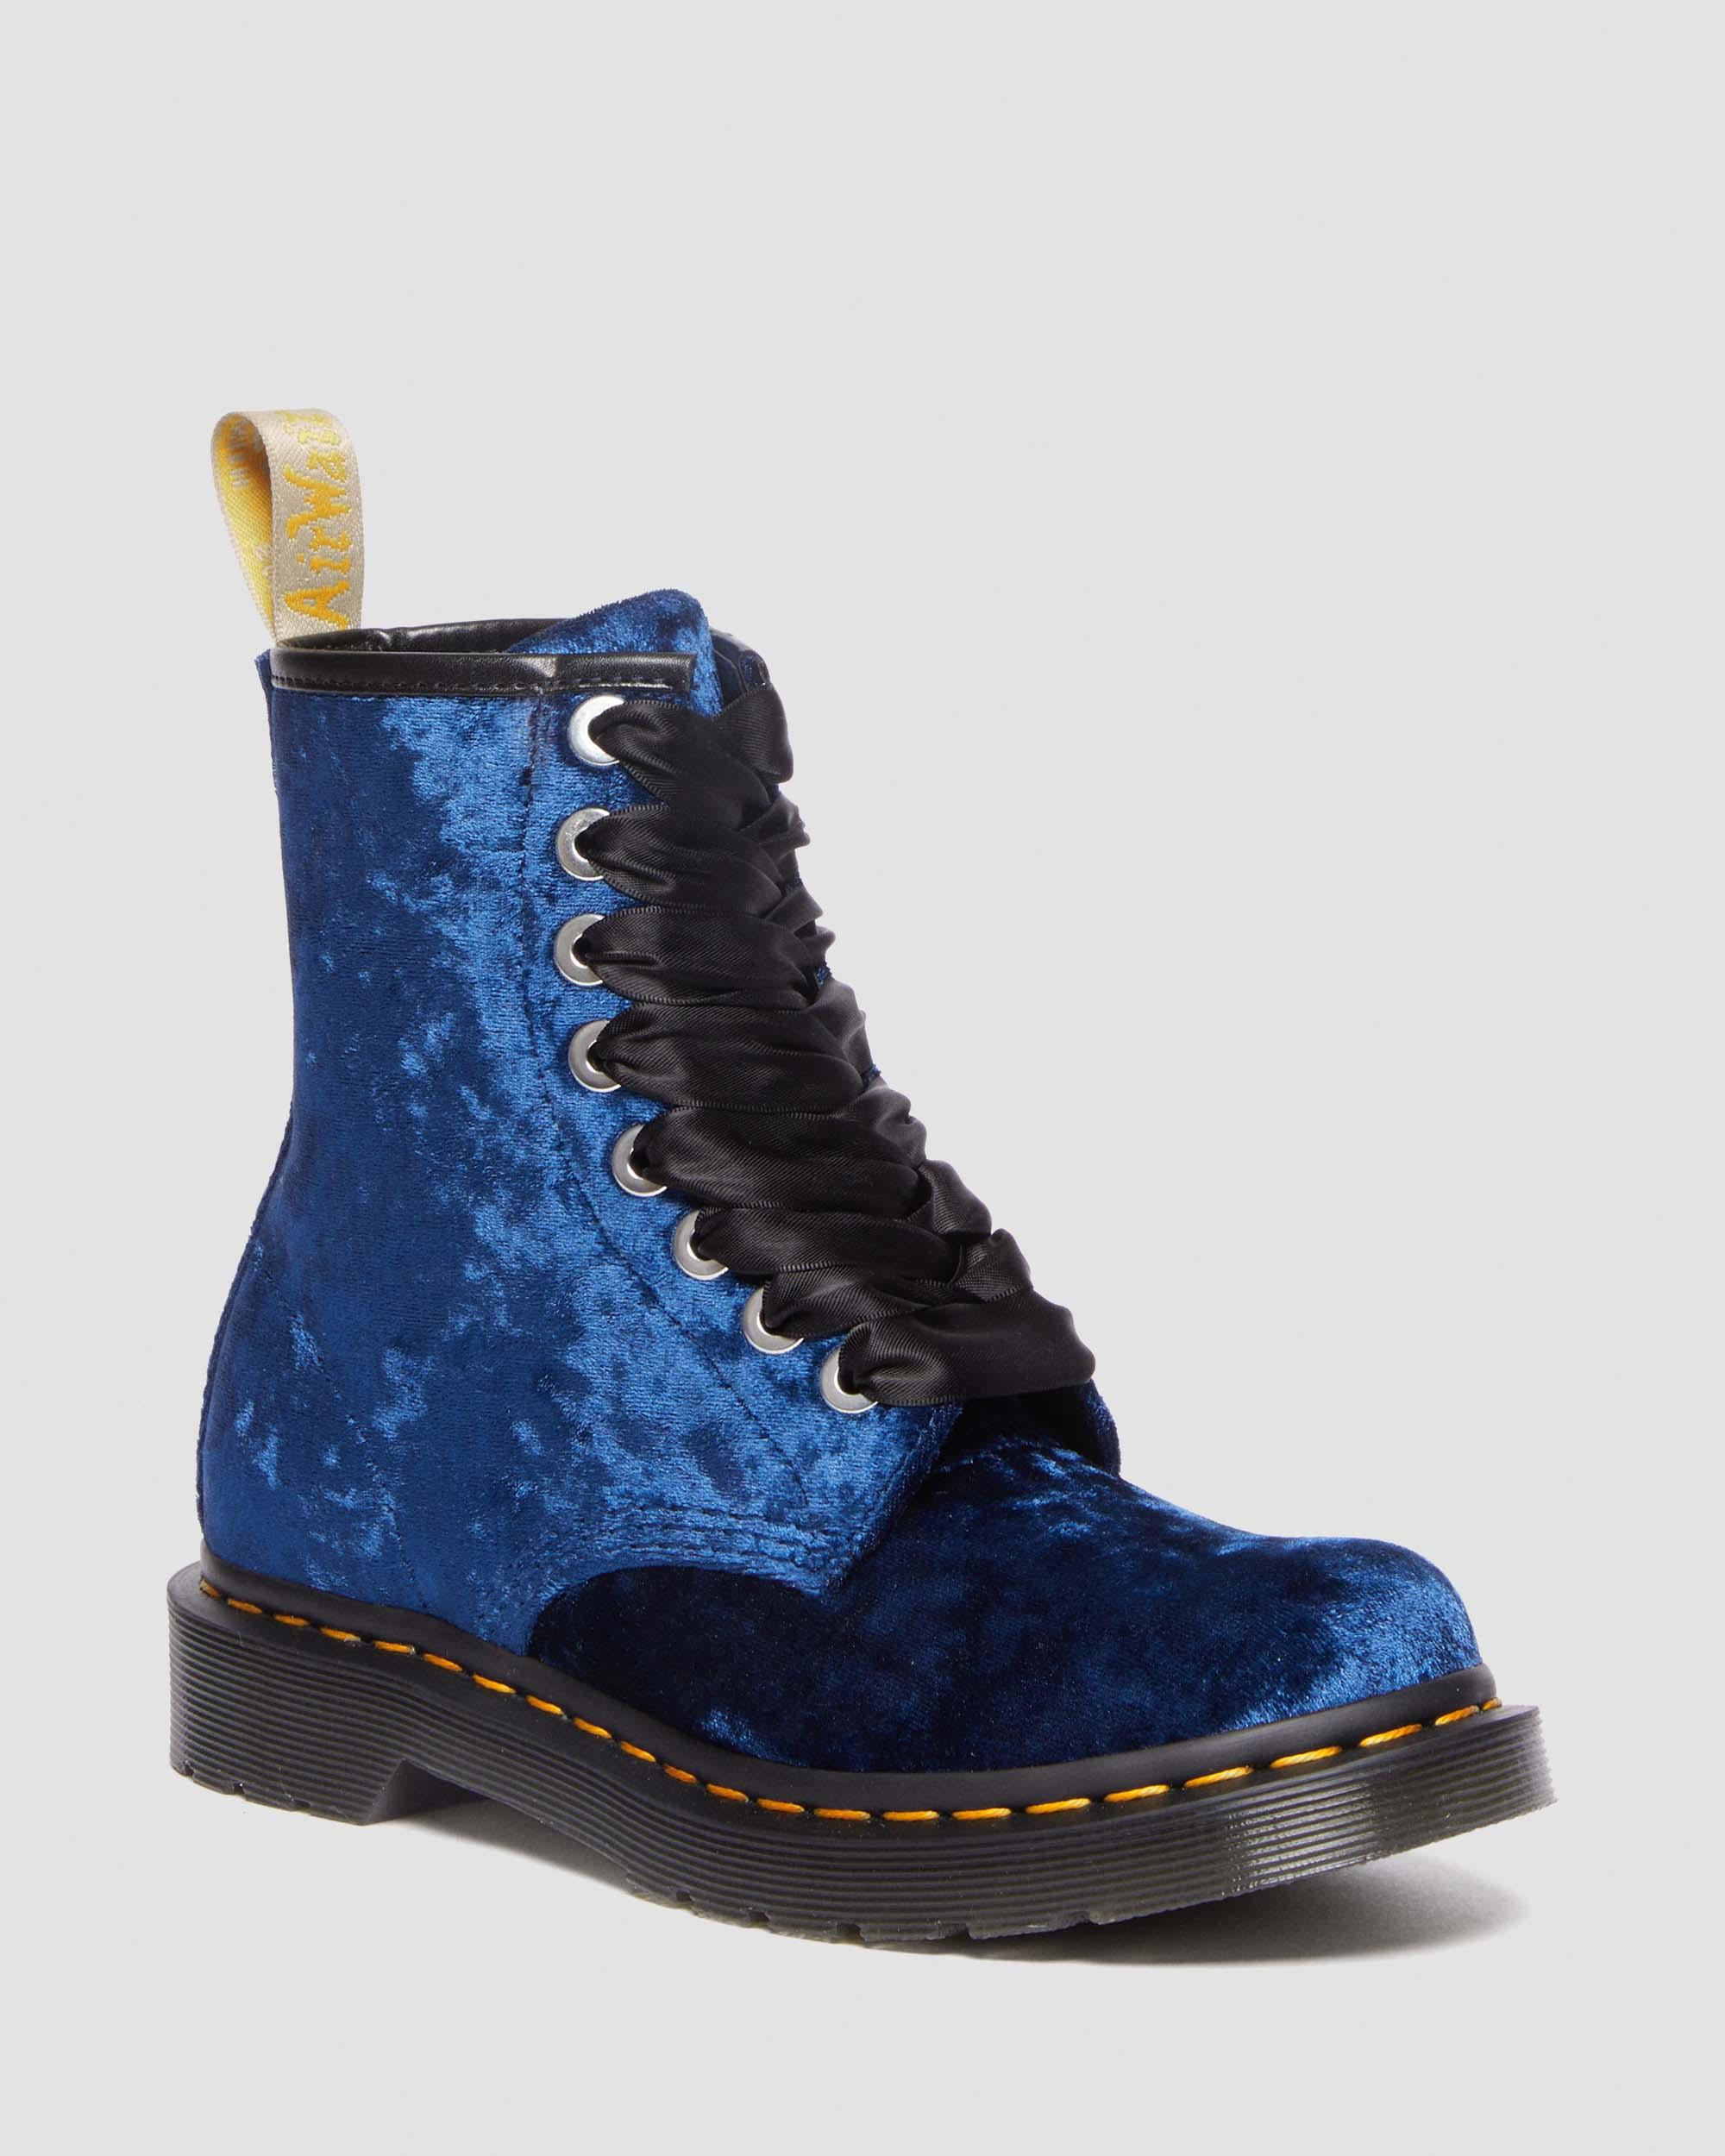 Vegan 1460 Women's Crushed Velvet Lace Up Boots in Deep Blue